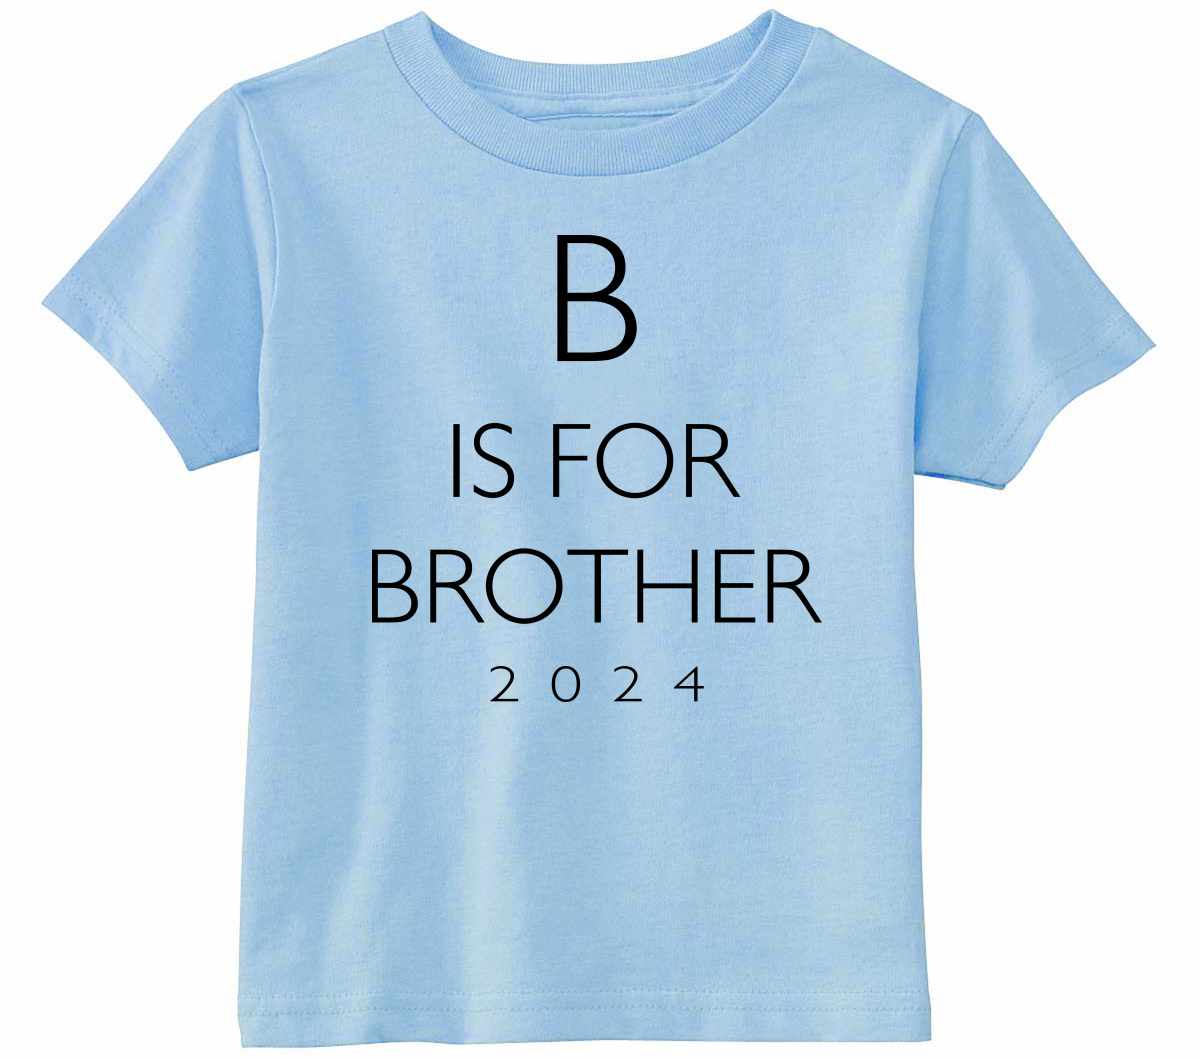 B Is For Brother 2024 on Infant-Toddler T-Shirt (#1366-7)